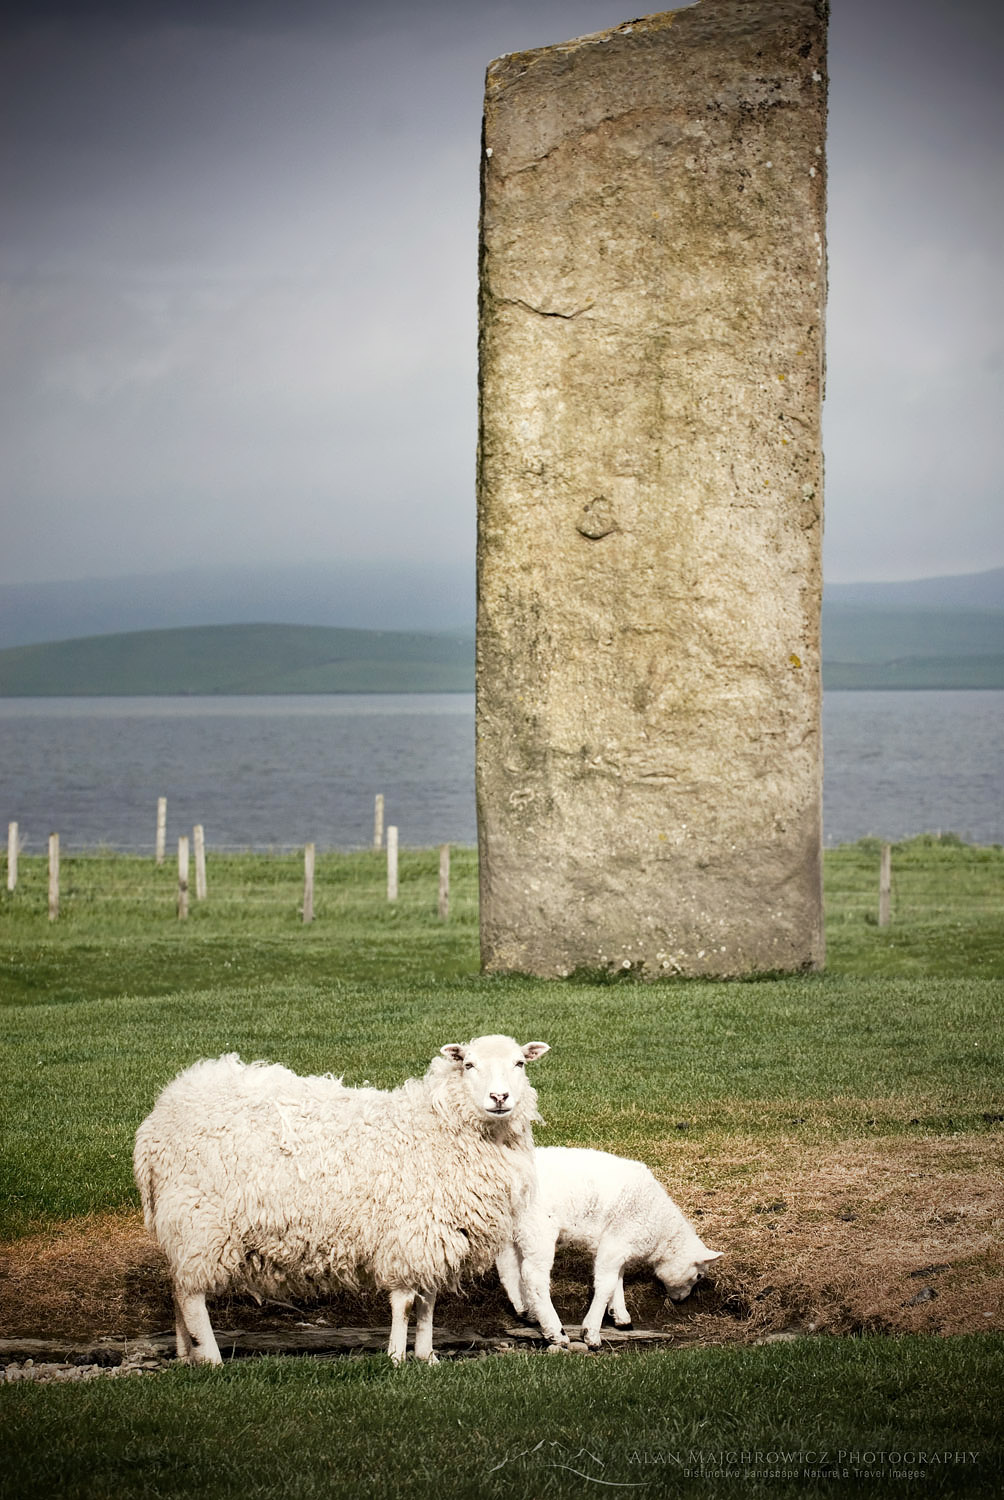 Standing Stones of Stenness, a Neolithic stone circle dating from 3100BC, Orkney Islands Scotland #12613r